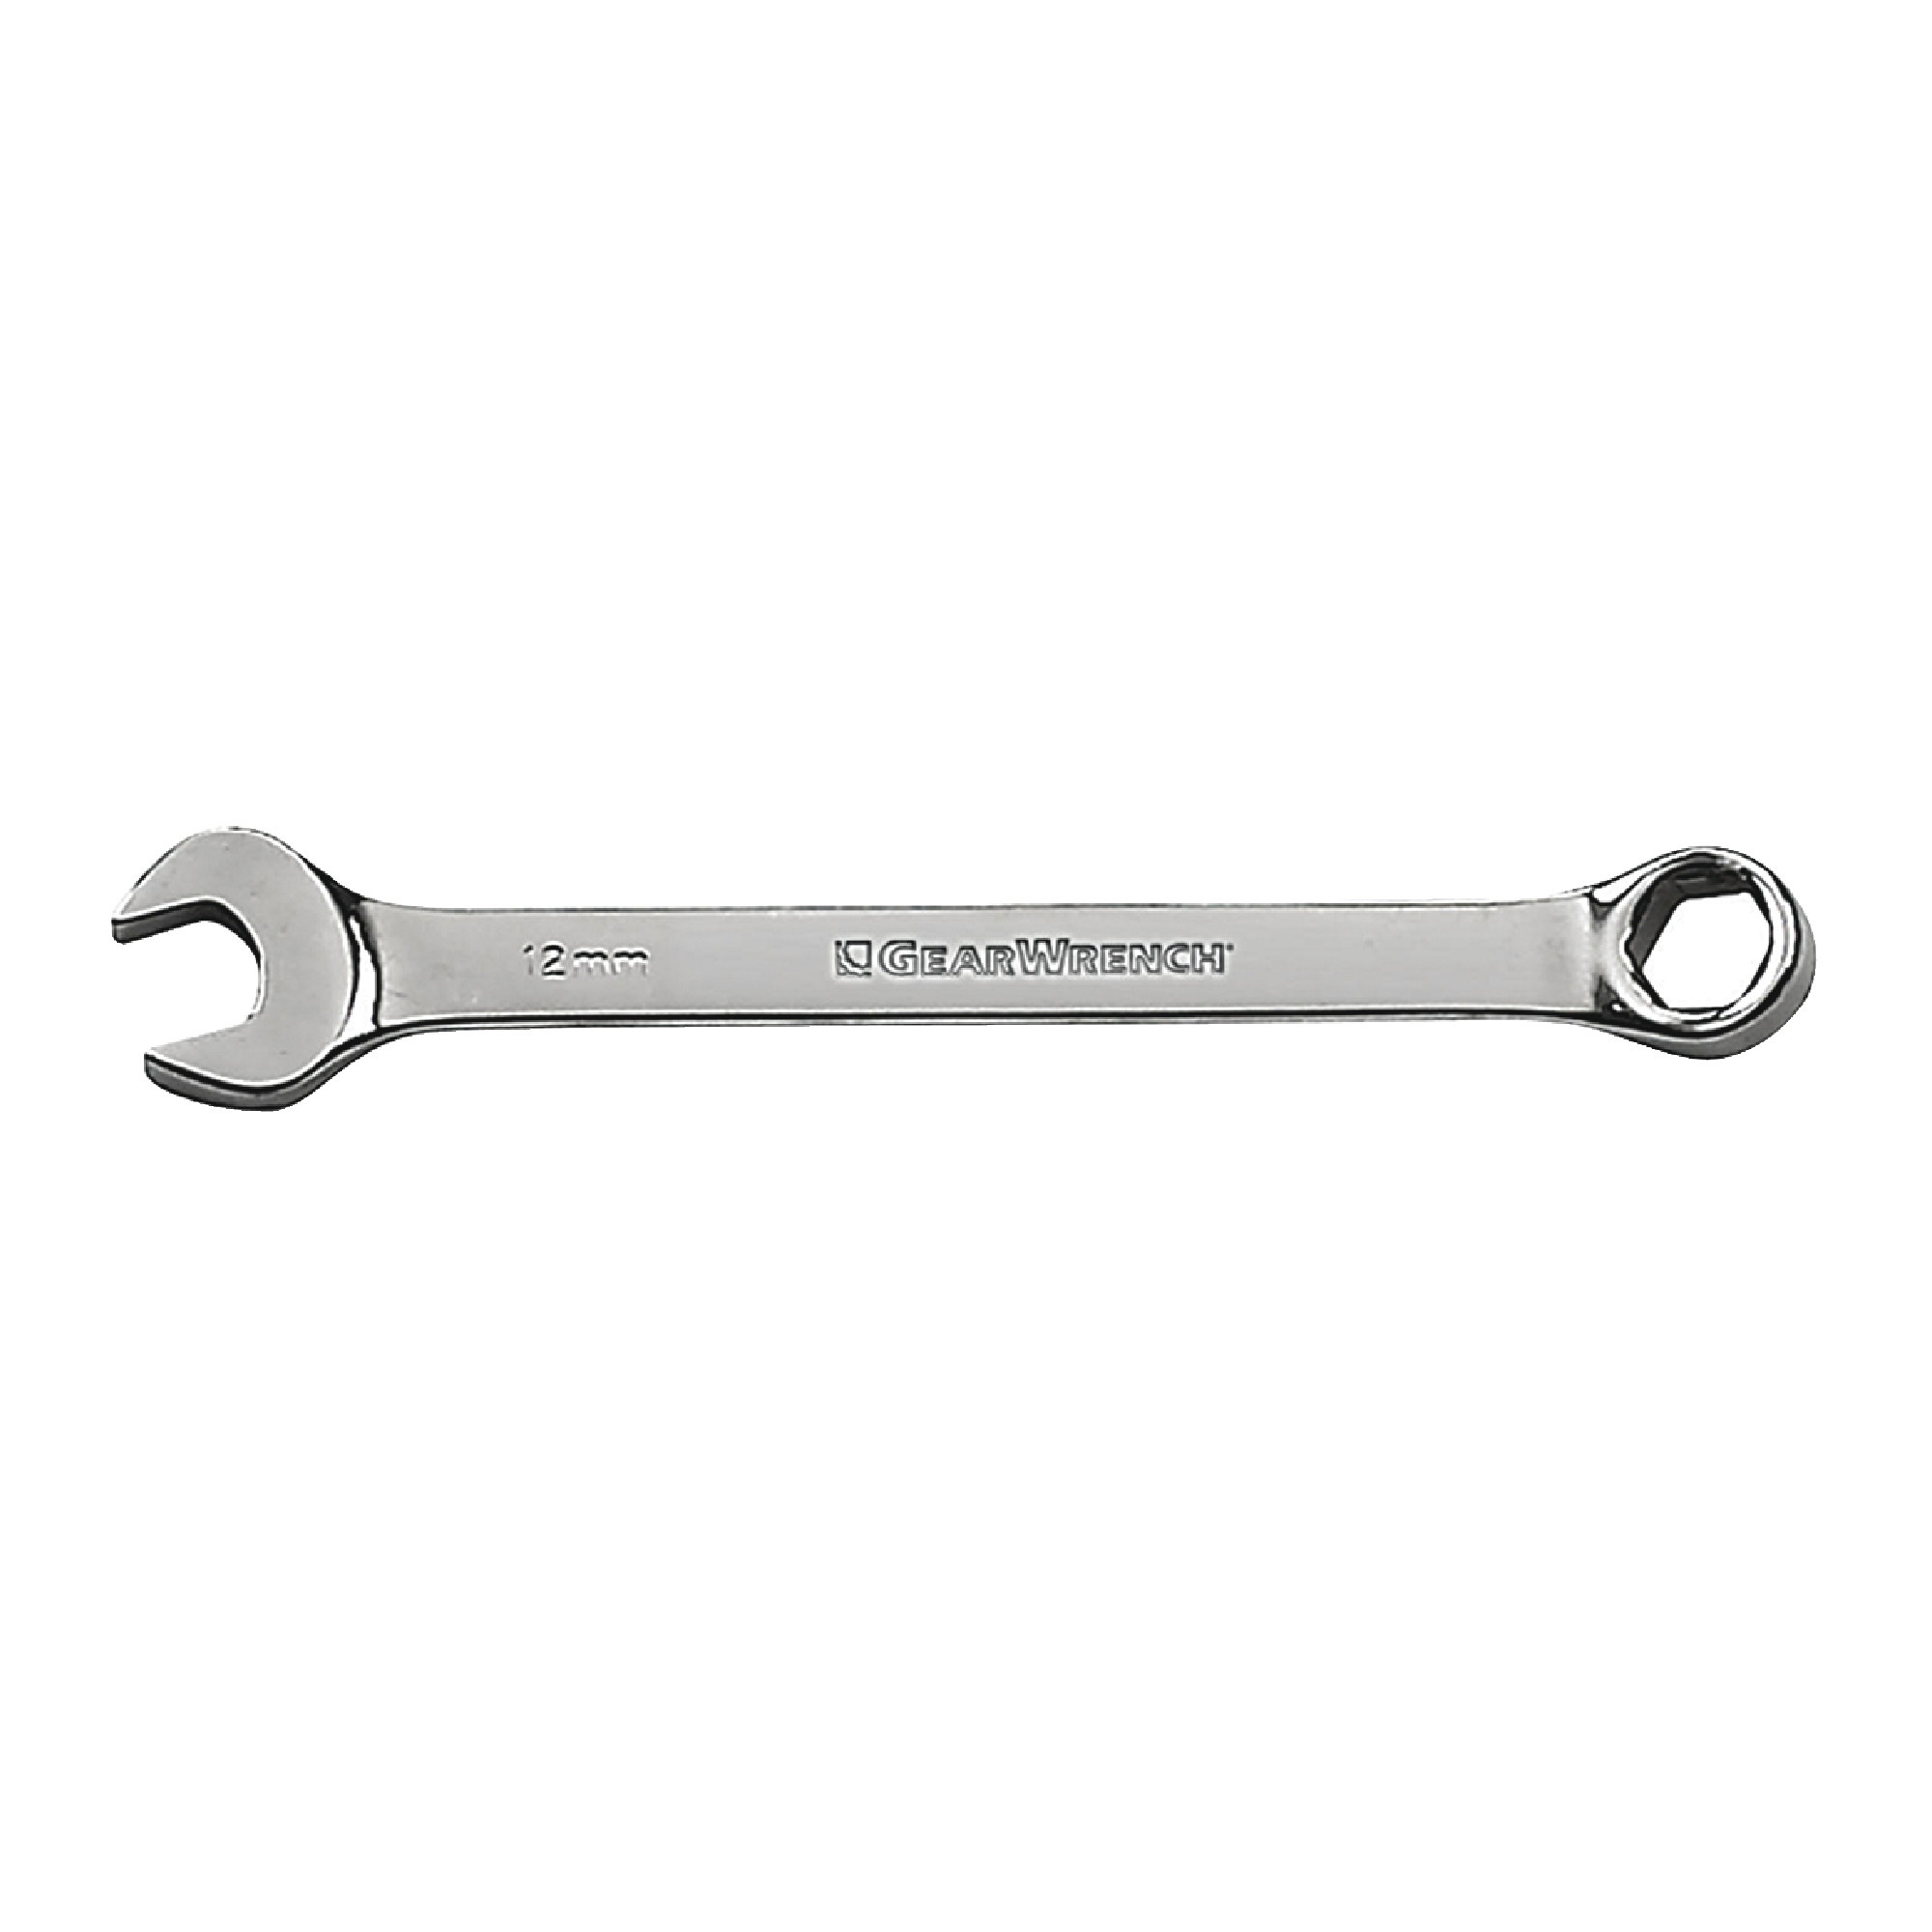 11mm 6 Point Combination Wrench